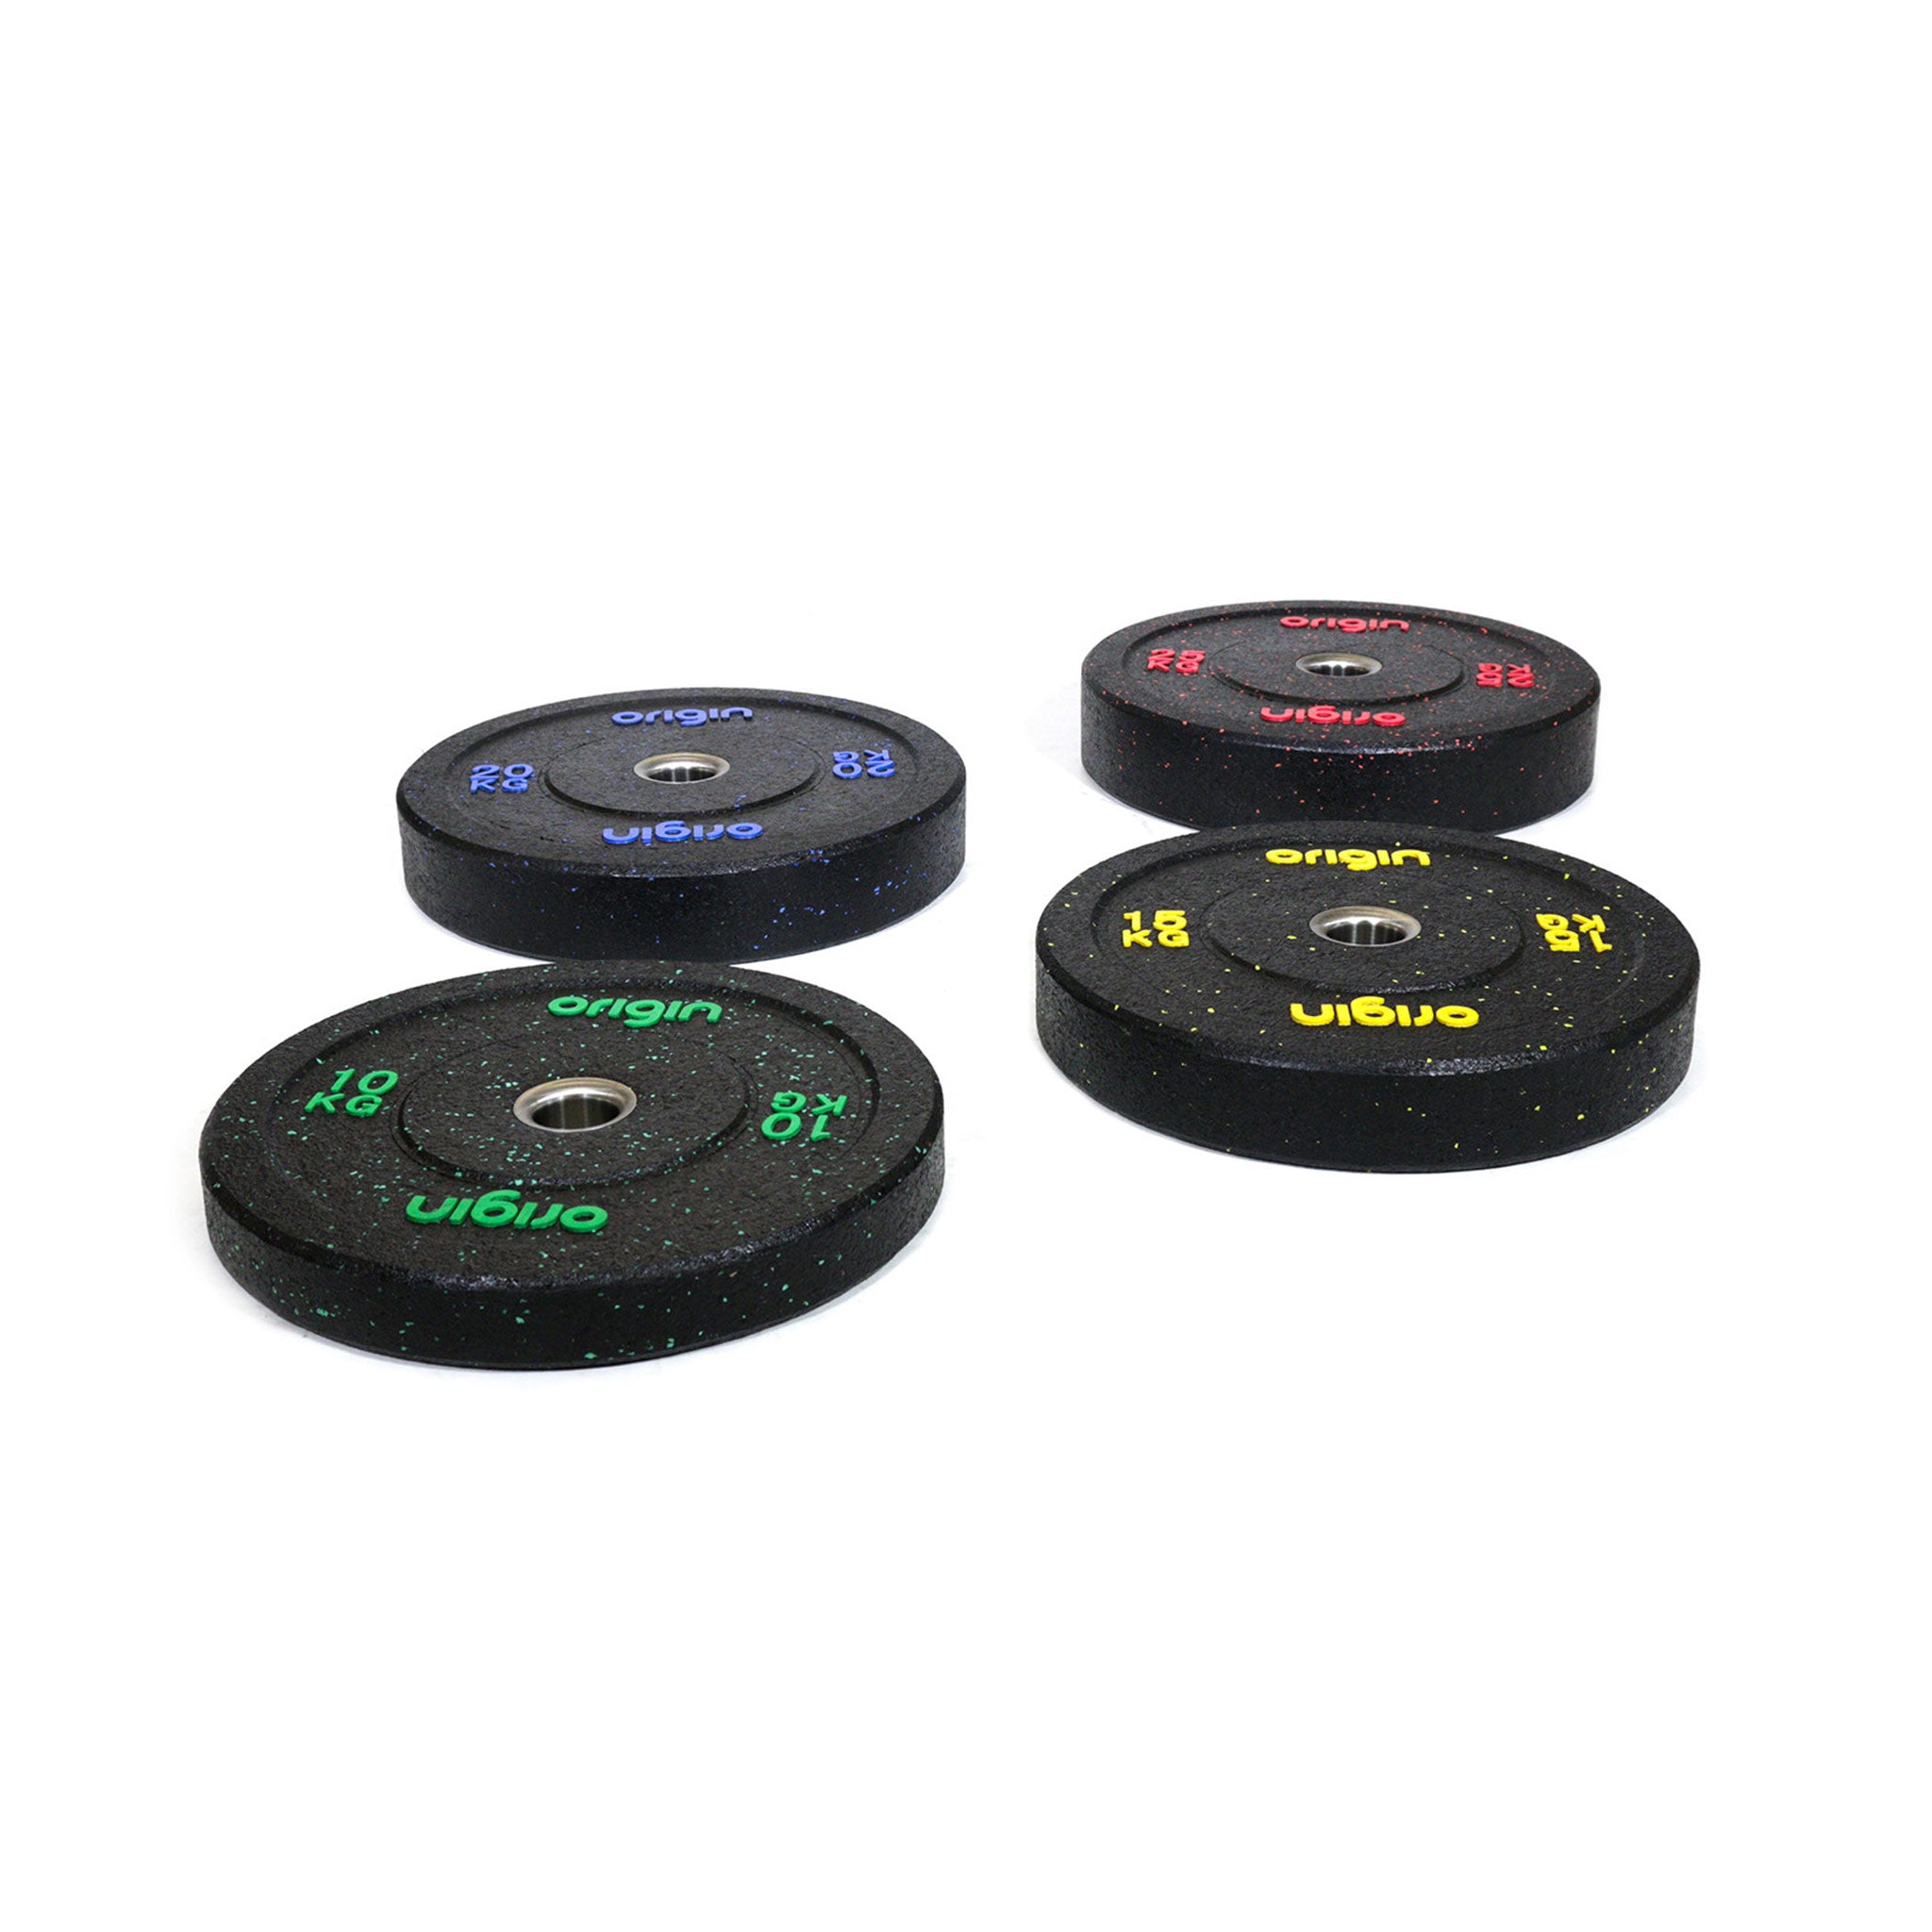 four rubber crumb bumper weight plates with coloured numbering